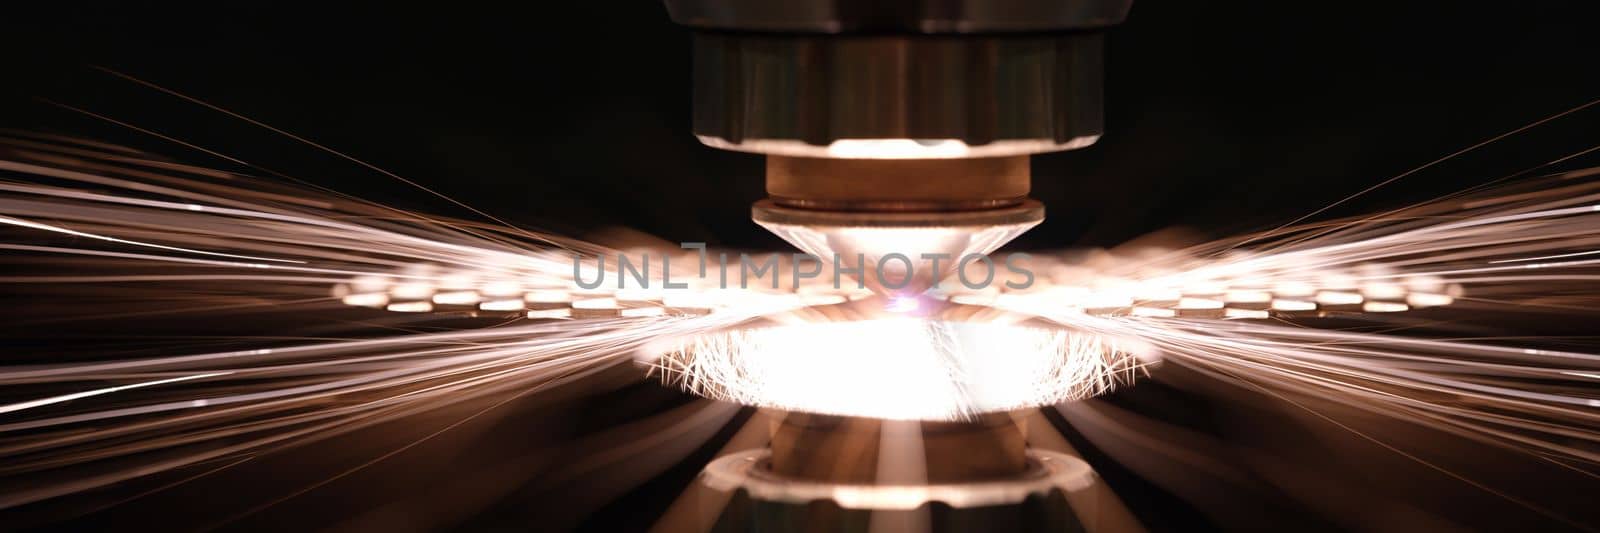 Laser cutting of metal sheet in production closeup by kuprevich